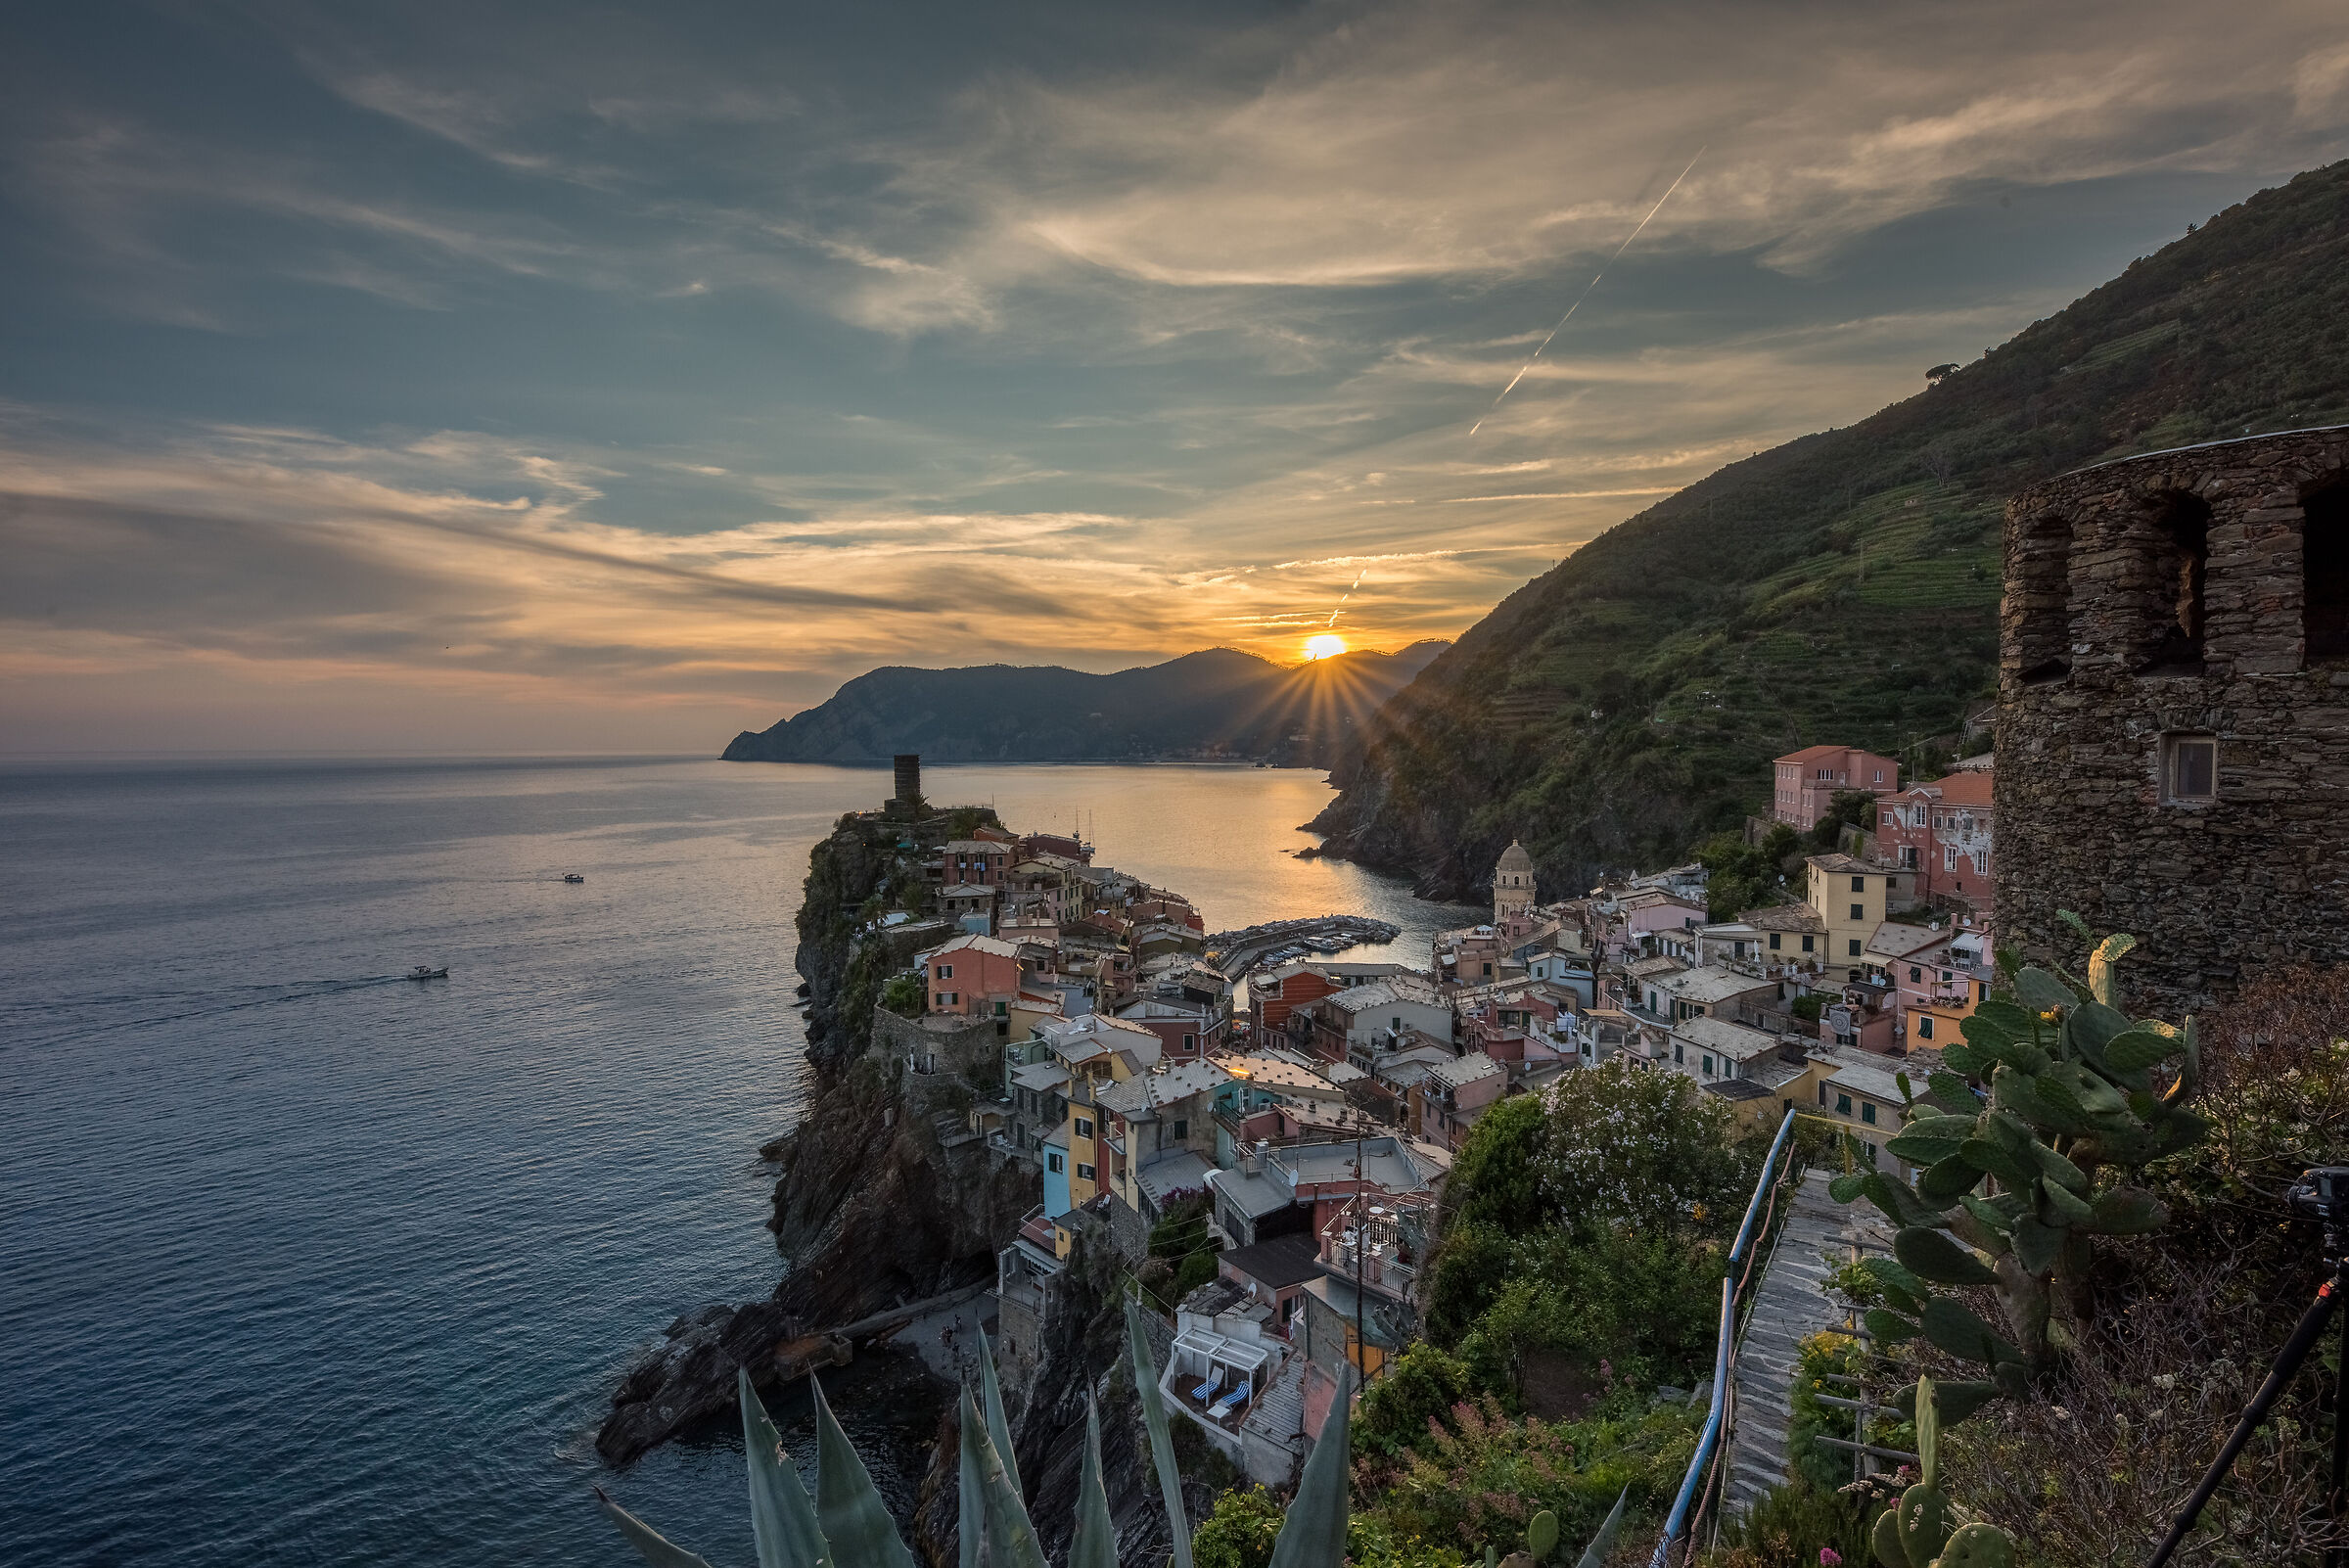 Sunset in Vernazza...